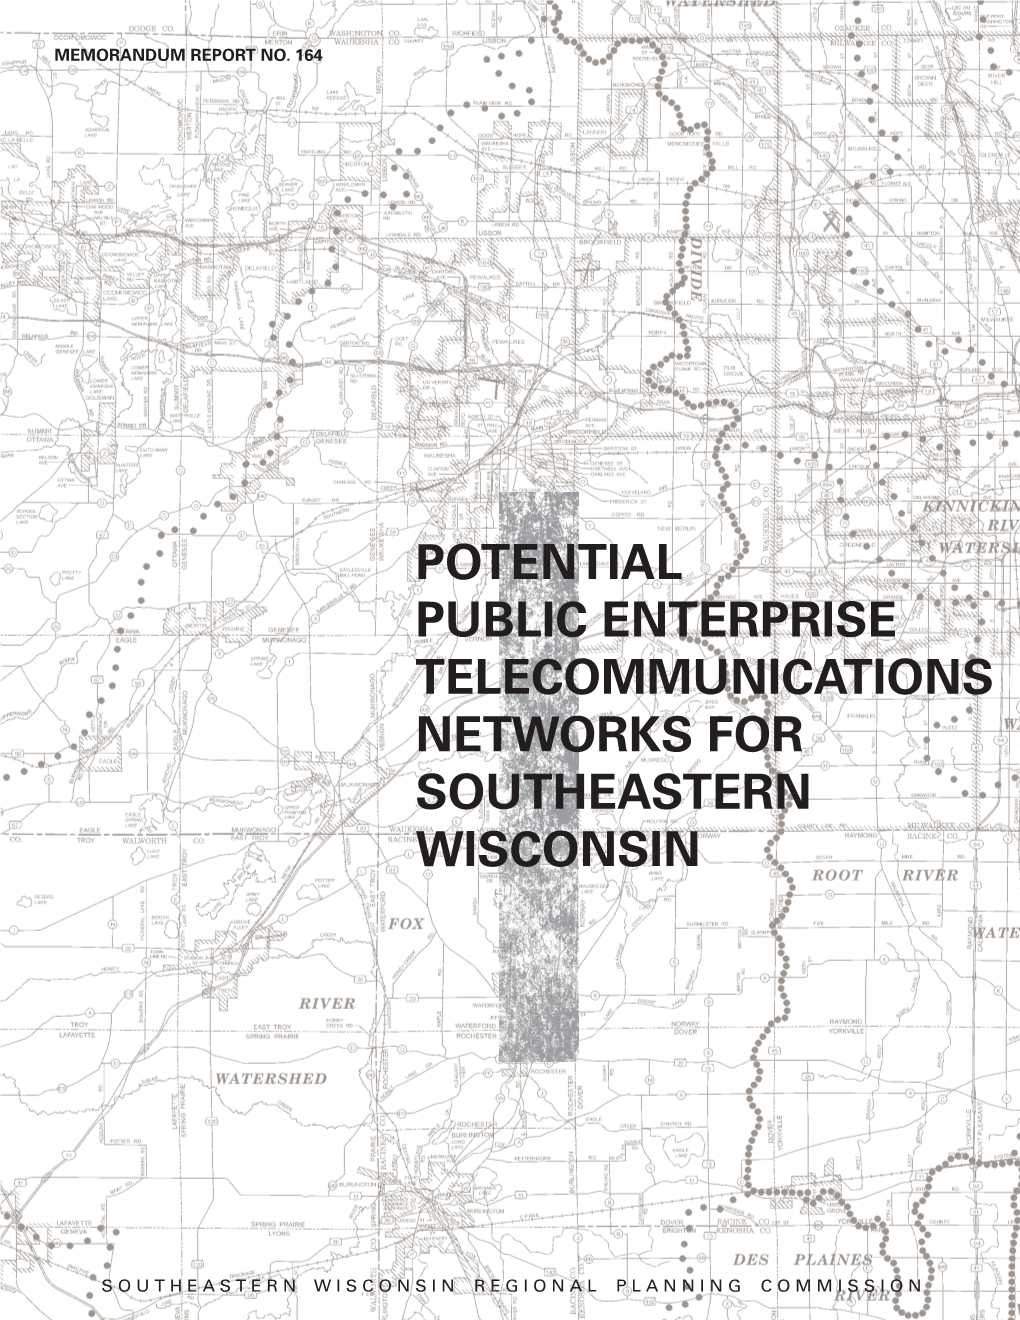 Potential Public Enterprise Telecommunications Networks for Southeastern Wisconsin